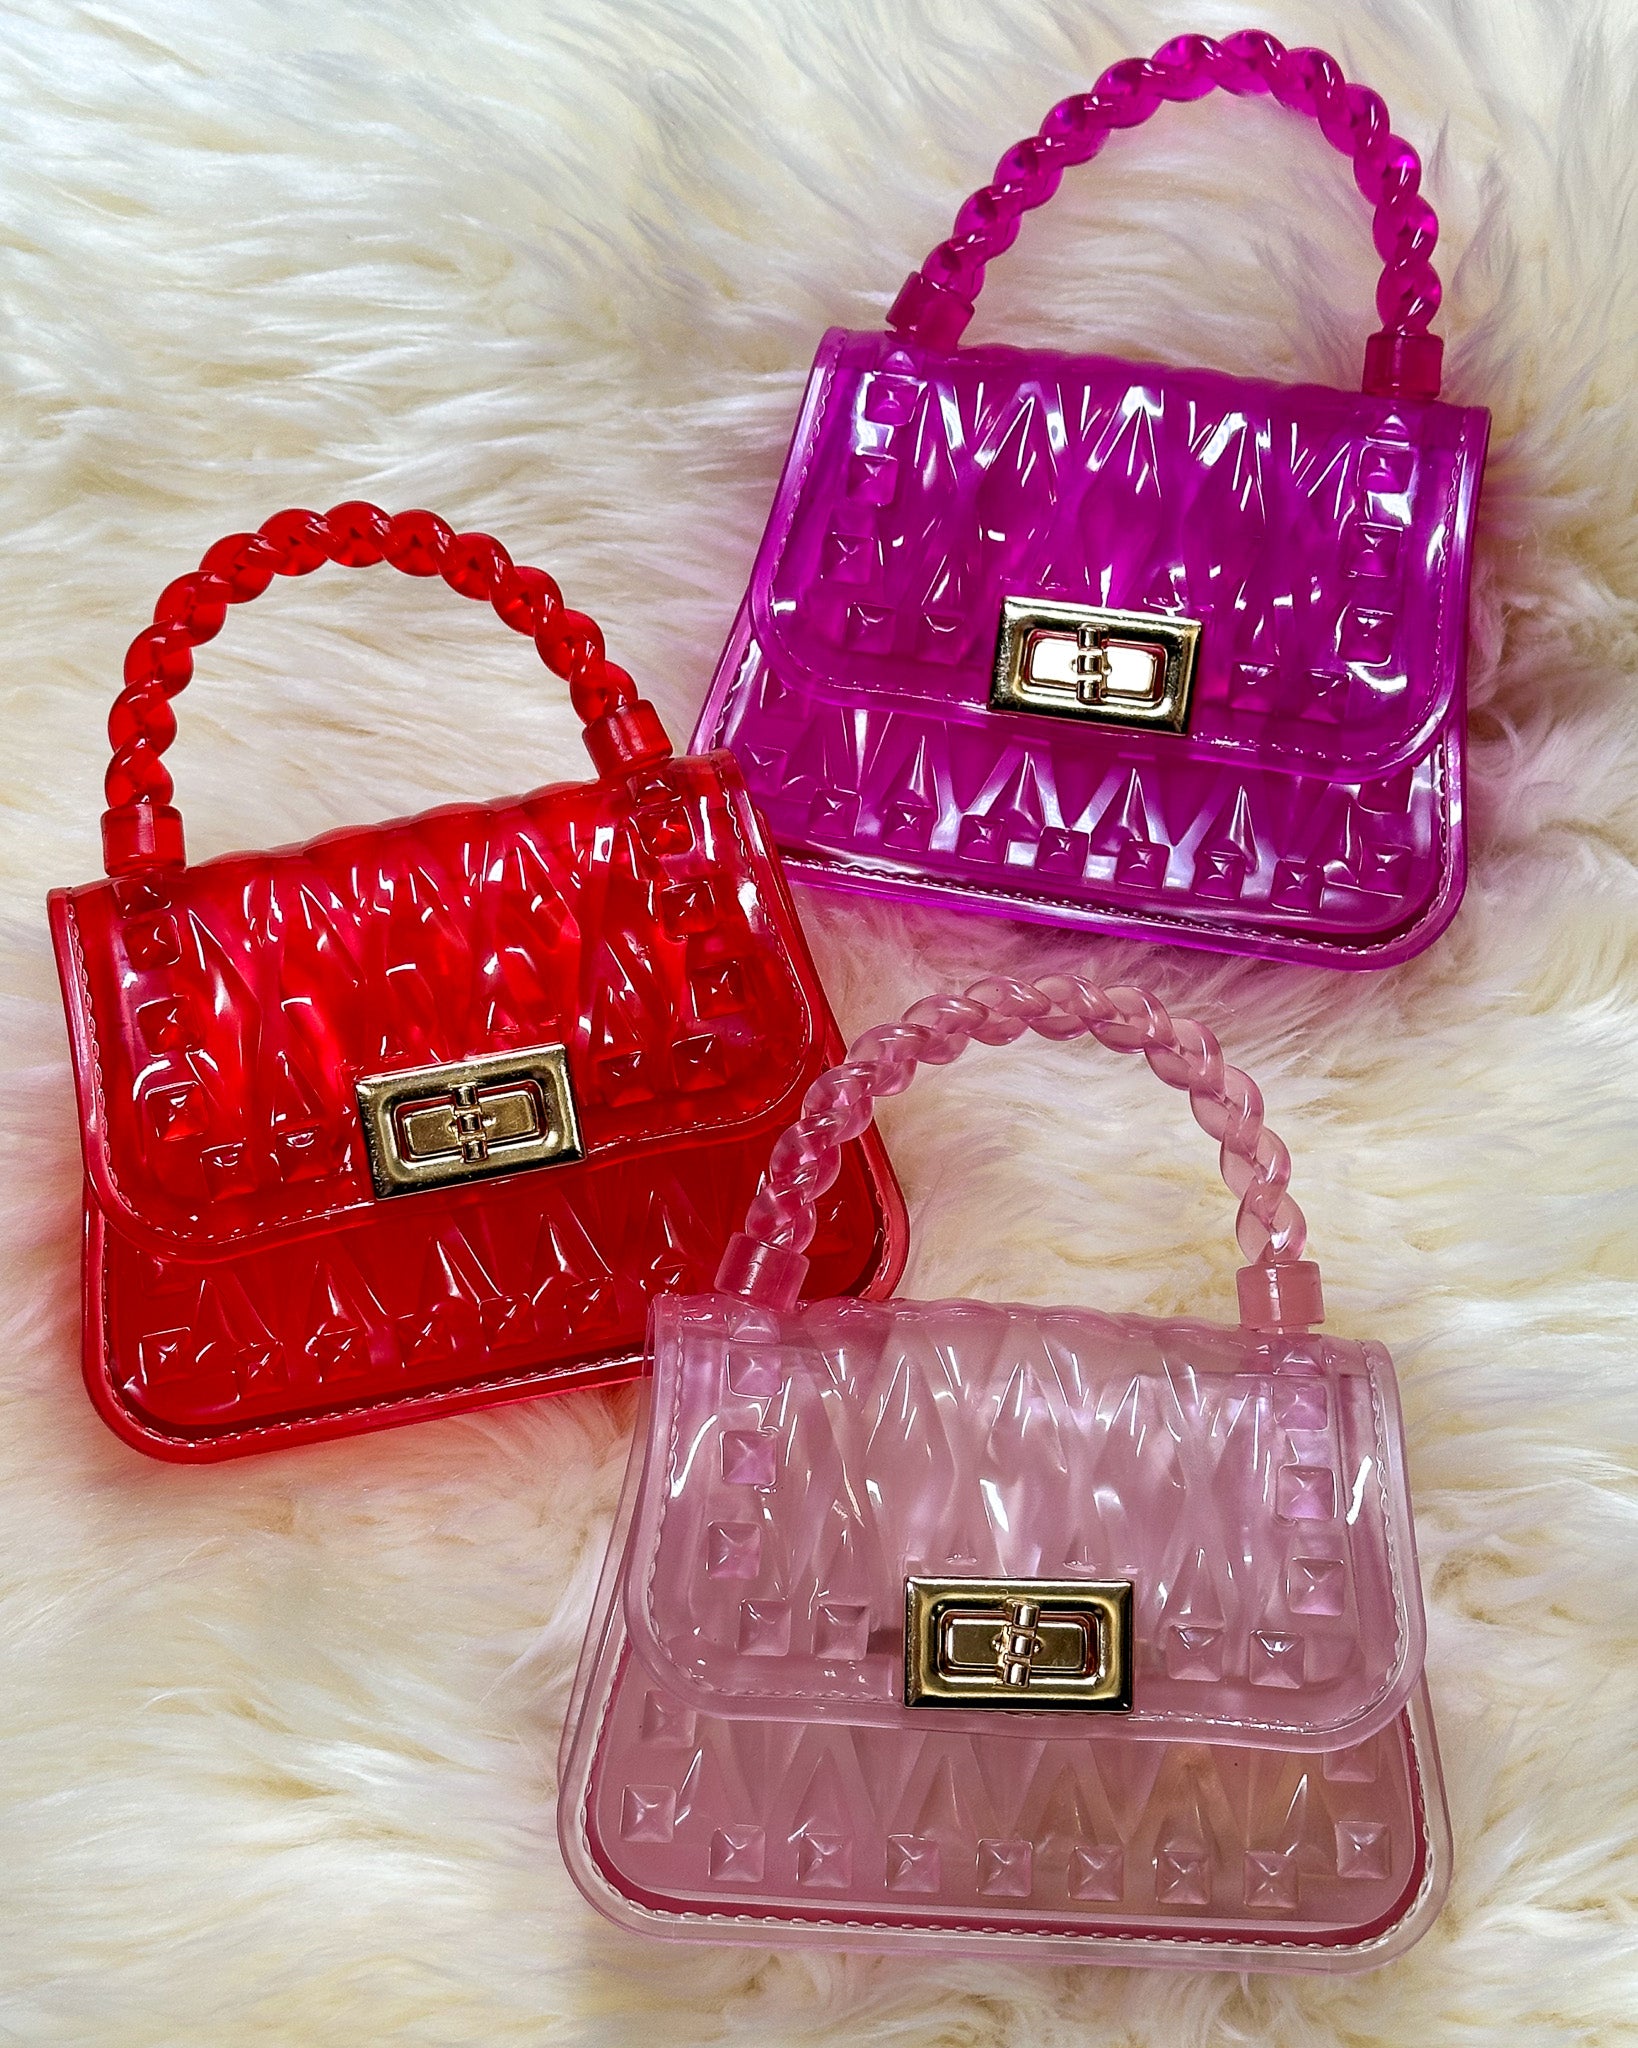 Reese Translucent Studded Jelly Purse